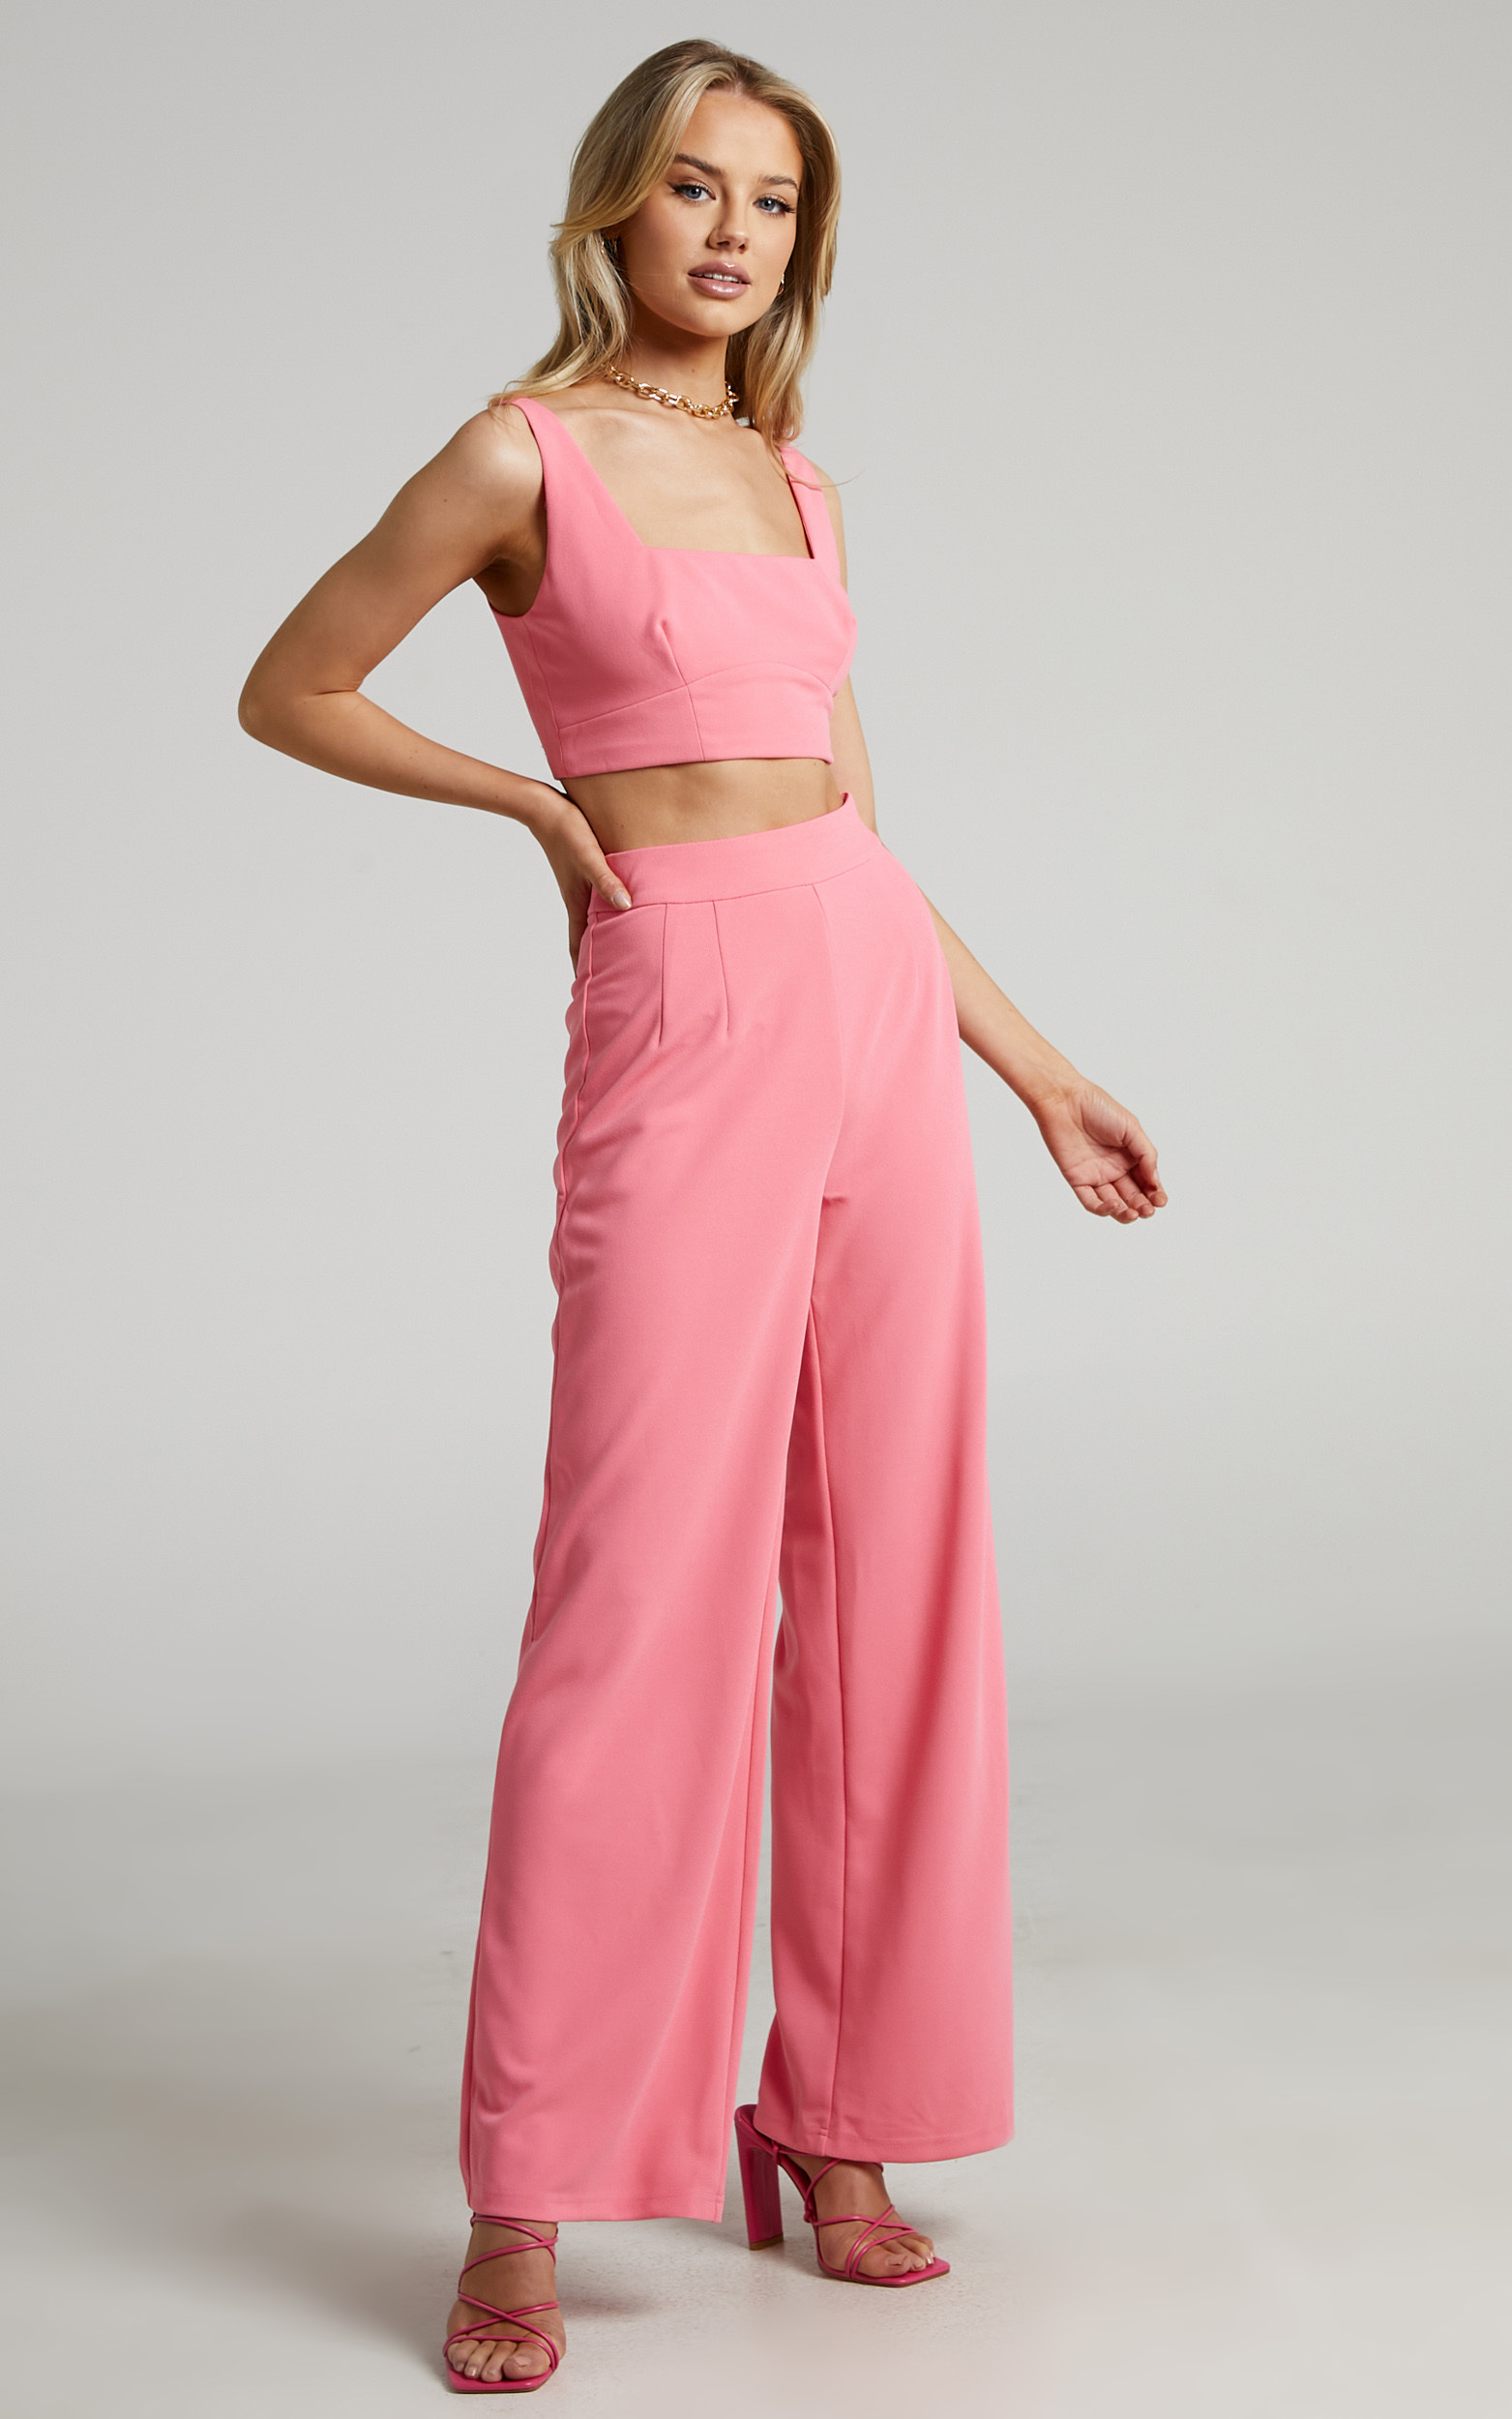 Elibeth Two Piece Set - Crop Top and High Waisted Wide Leg Pants in Bubblegum Pink - 04, PNK2, hi-res image number null